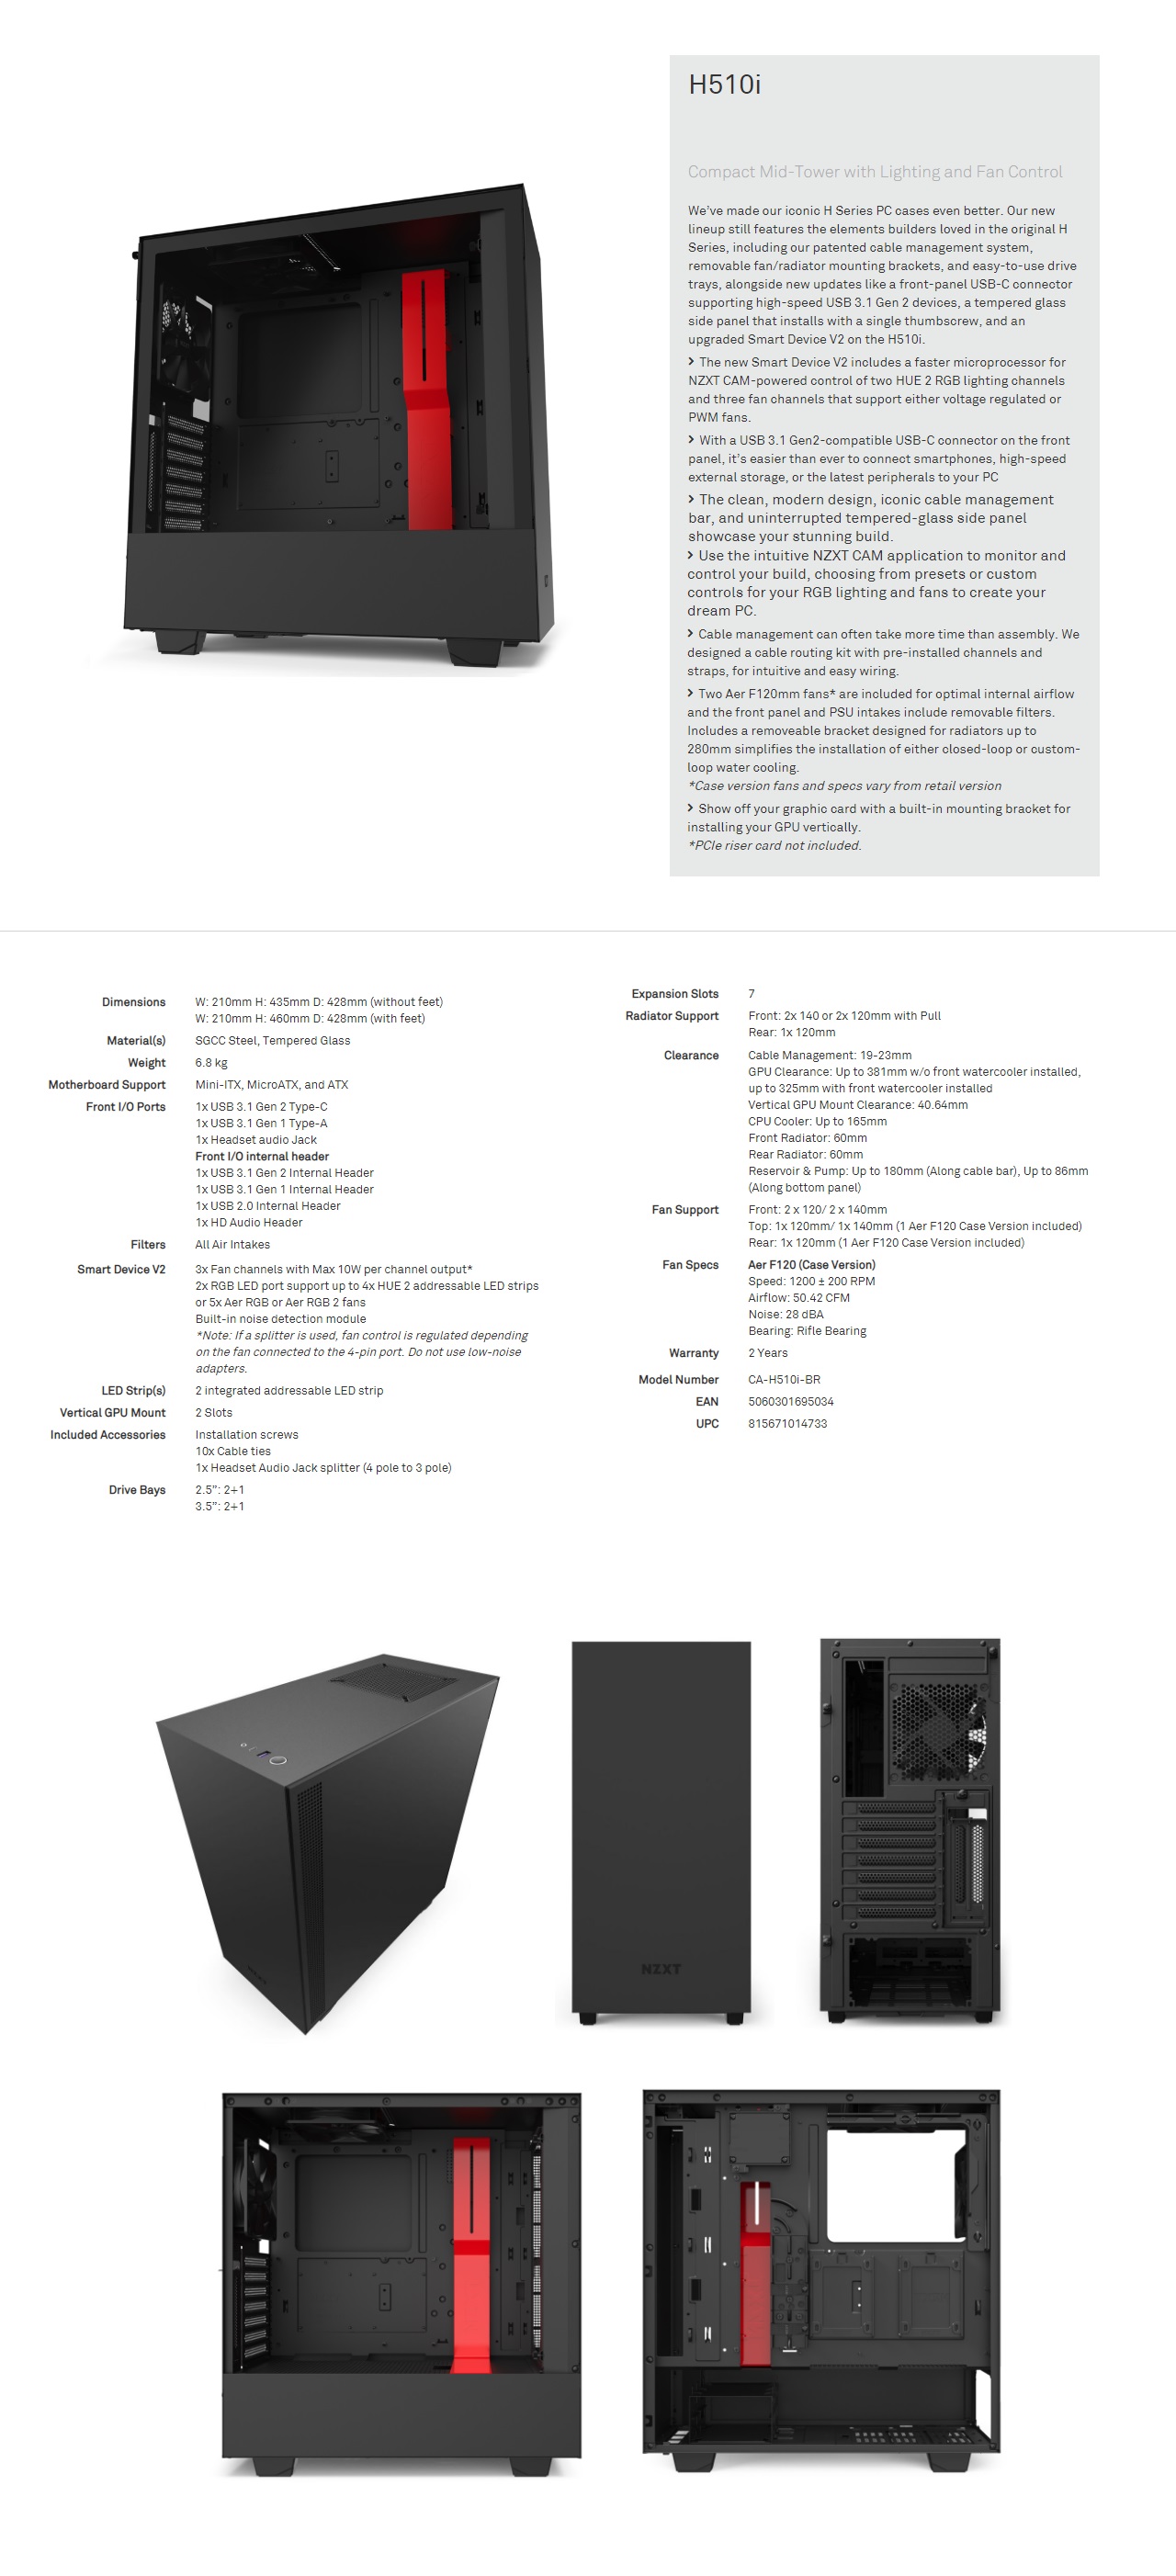  <b>Mid Tower</b>: Matte Black/Red H510i Mid Tower Chassis (Smart Device) ATX, 1*USB3.0 1*USB3.1 TYPE-C, 1*AUDIO JACK  